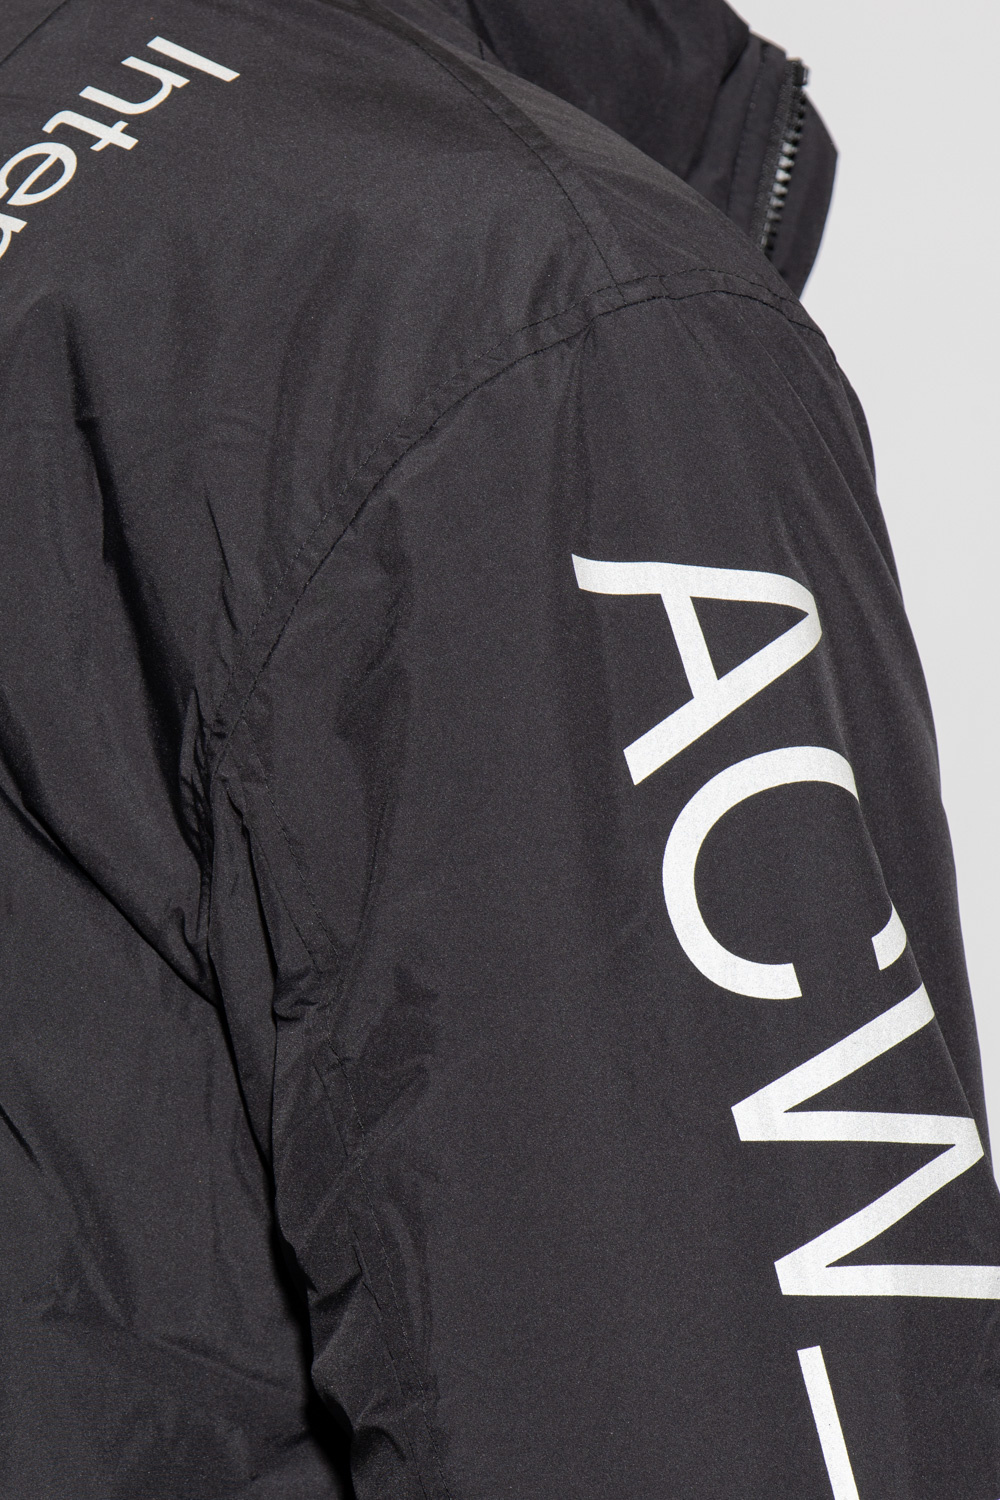 A-COLD-WALL* ‘Nephin’ jacket